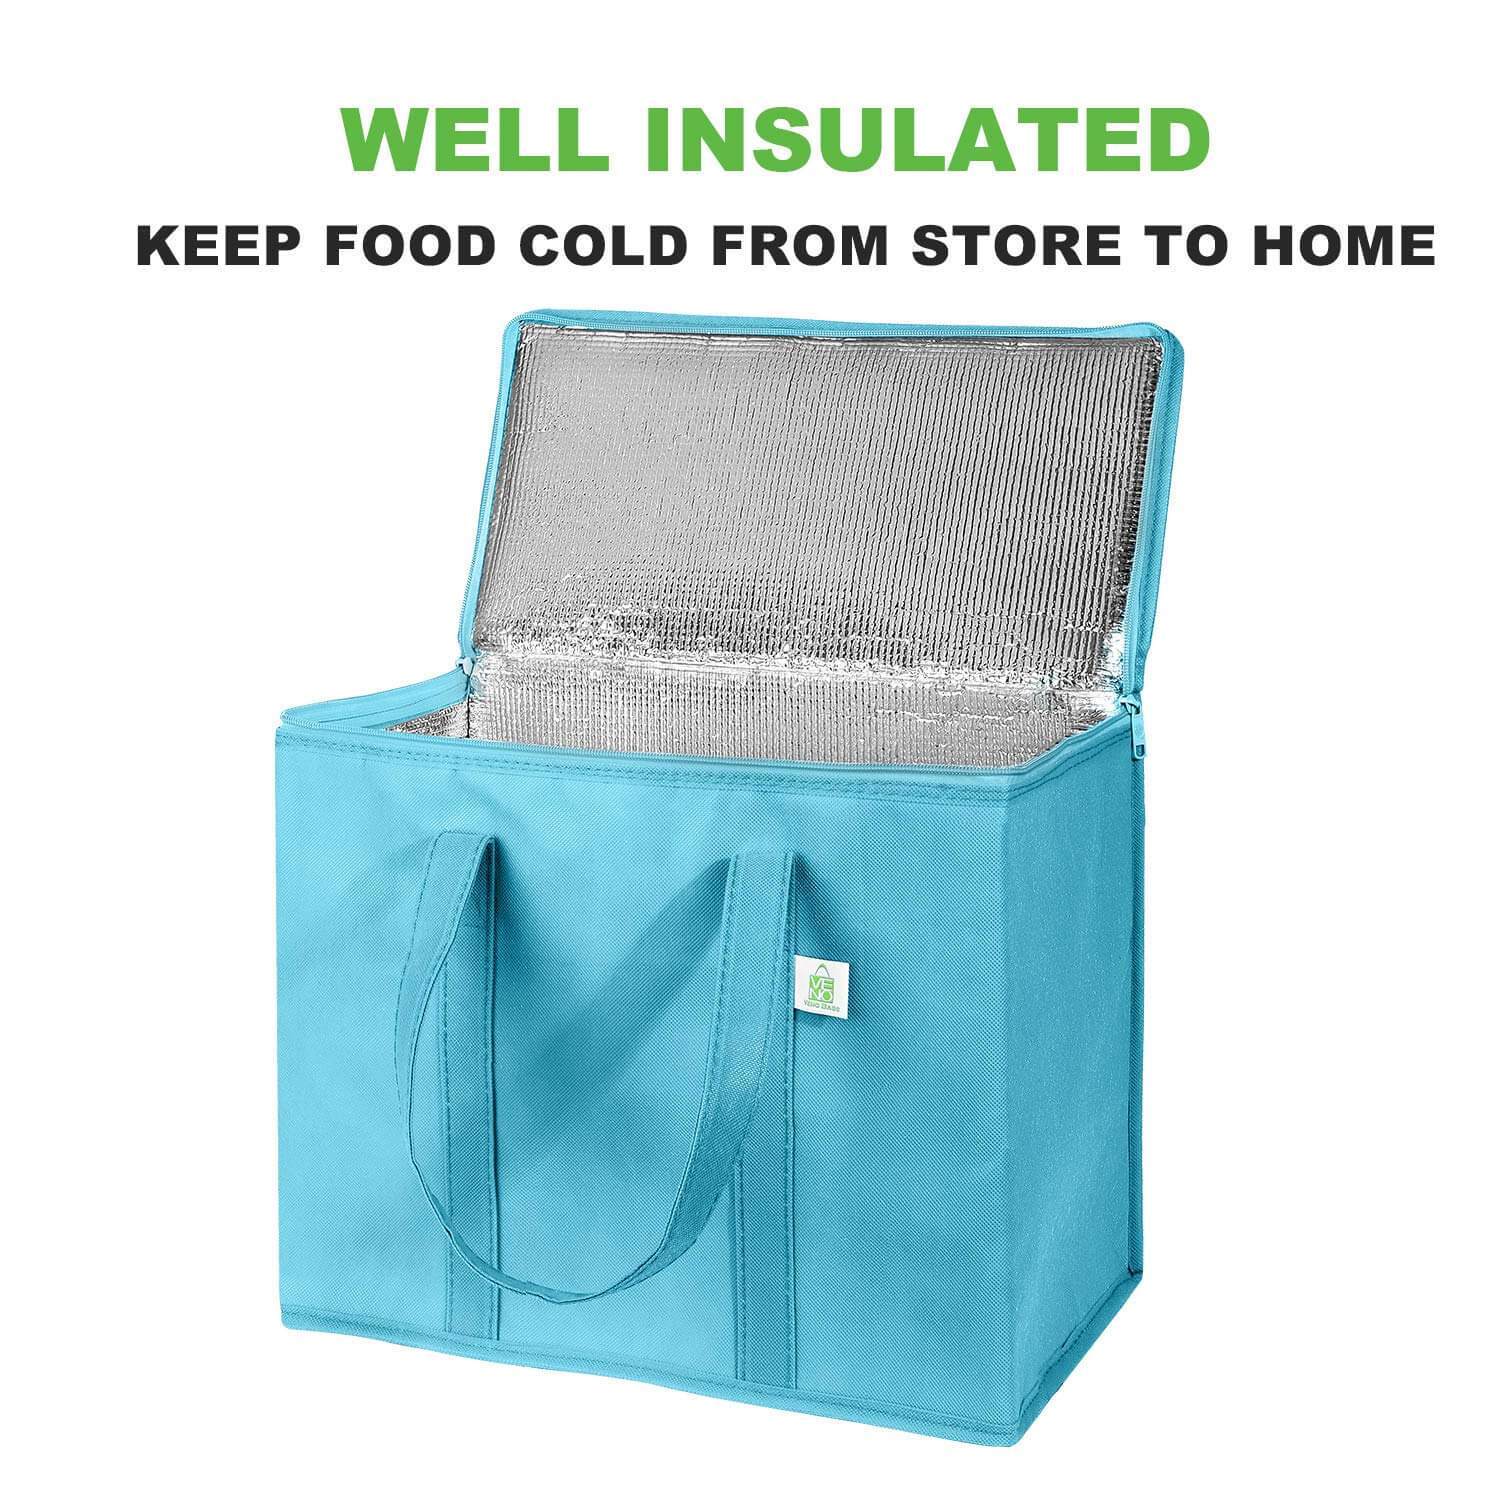 Insulated Reusable Grocery Bag, Durable, Heavy Duty and Extra Large Size - Cyan - image 2 of 8